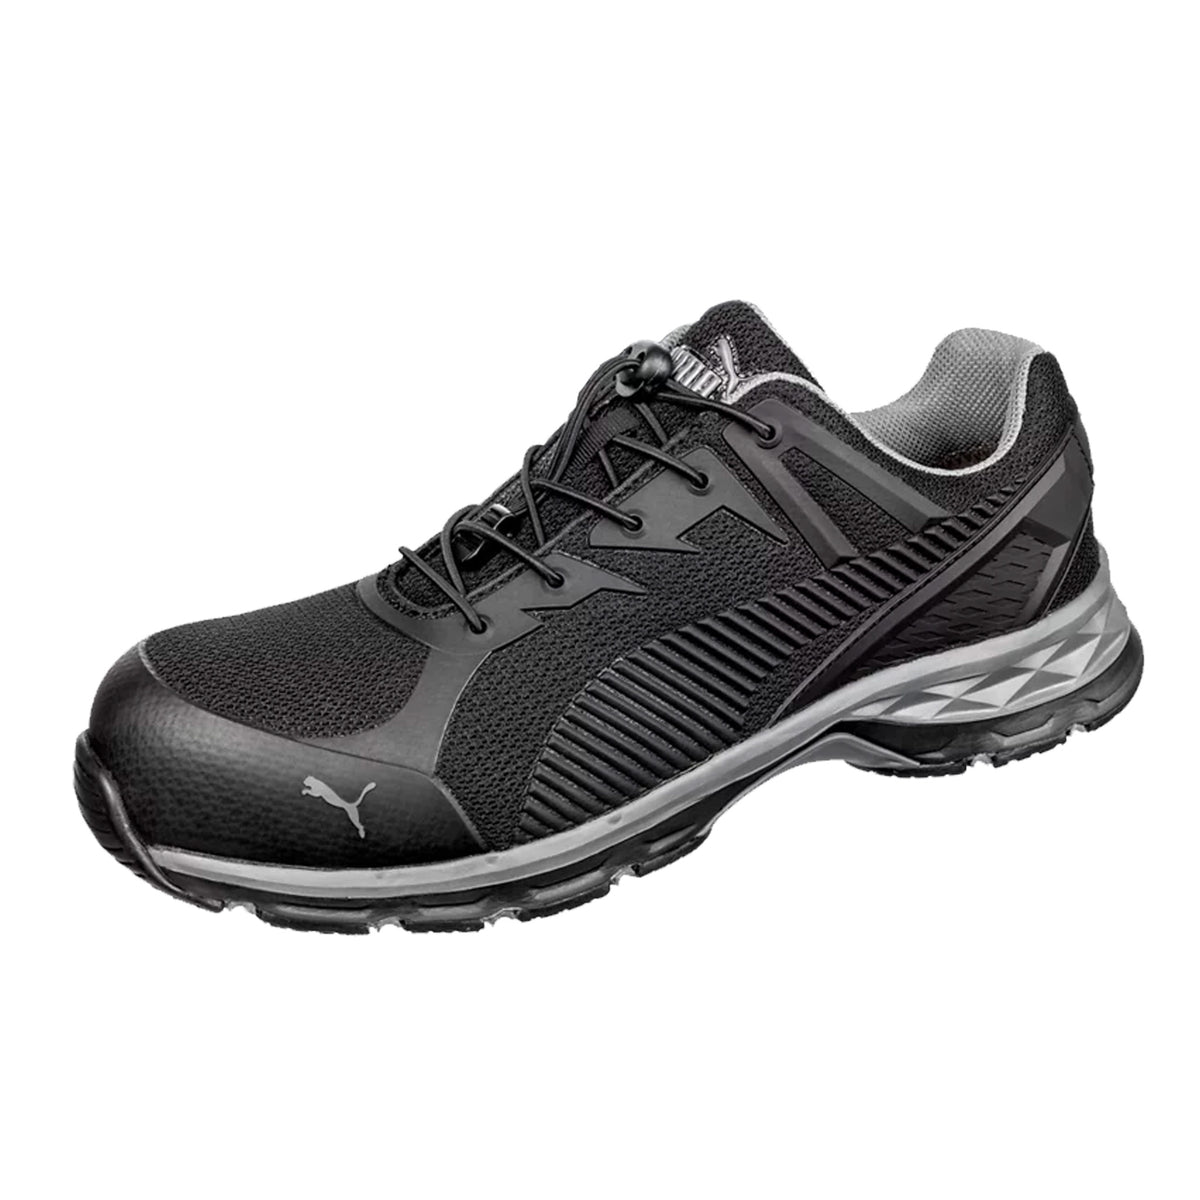 puma relay safety jogger in black